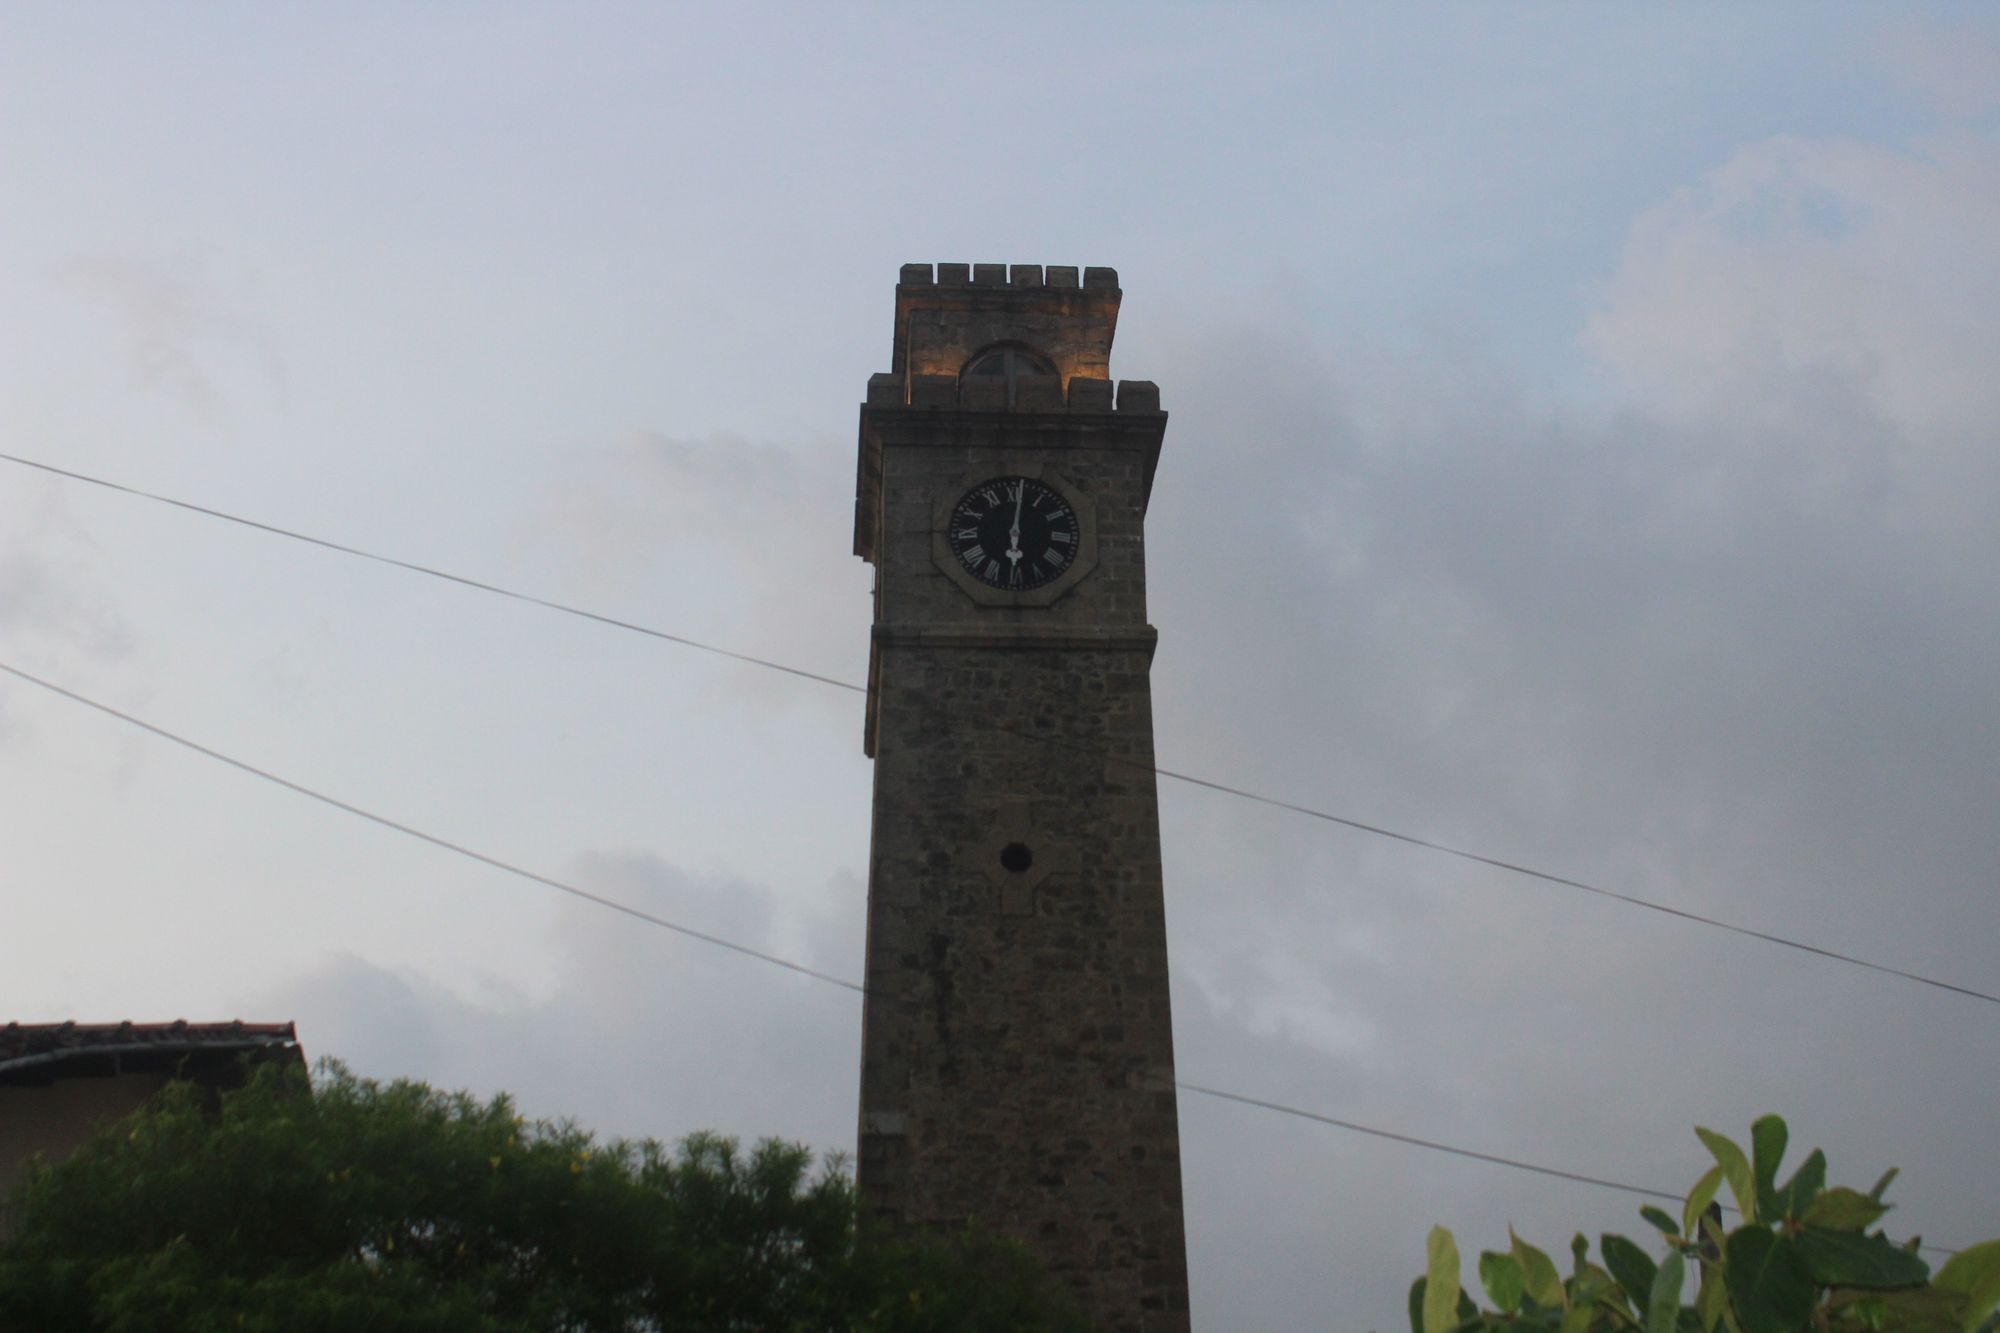 The Galle Fort clock tower during the evening.